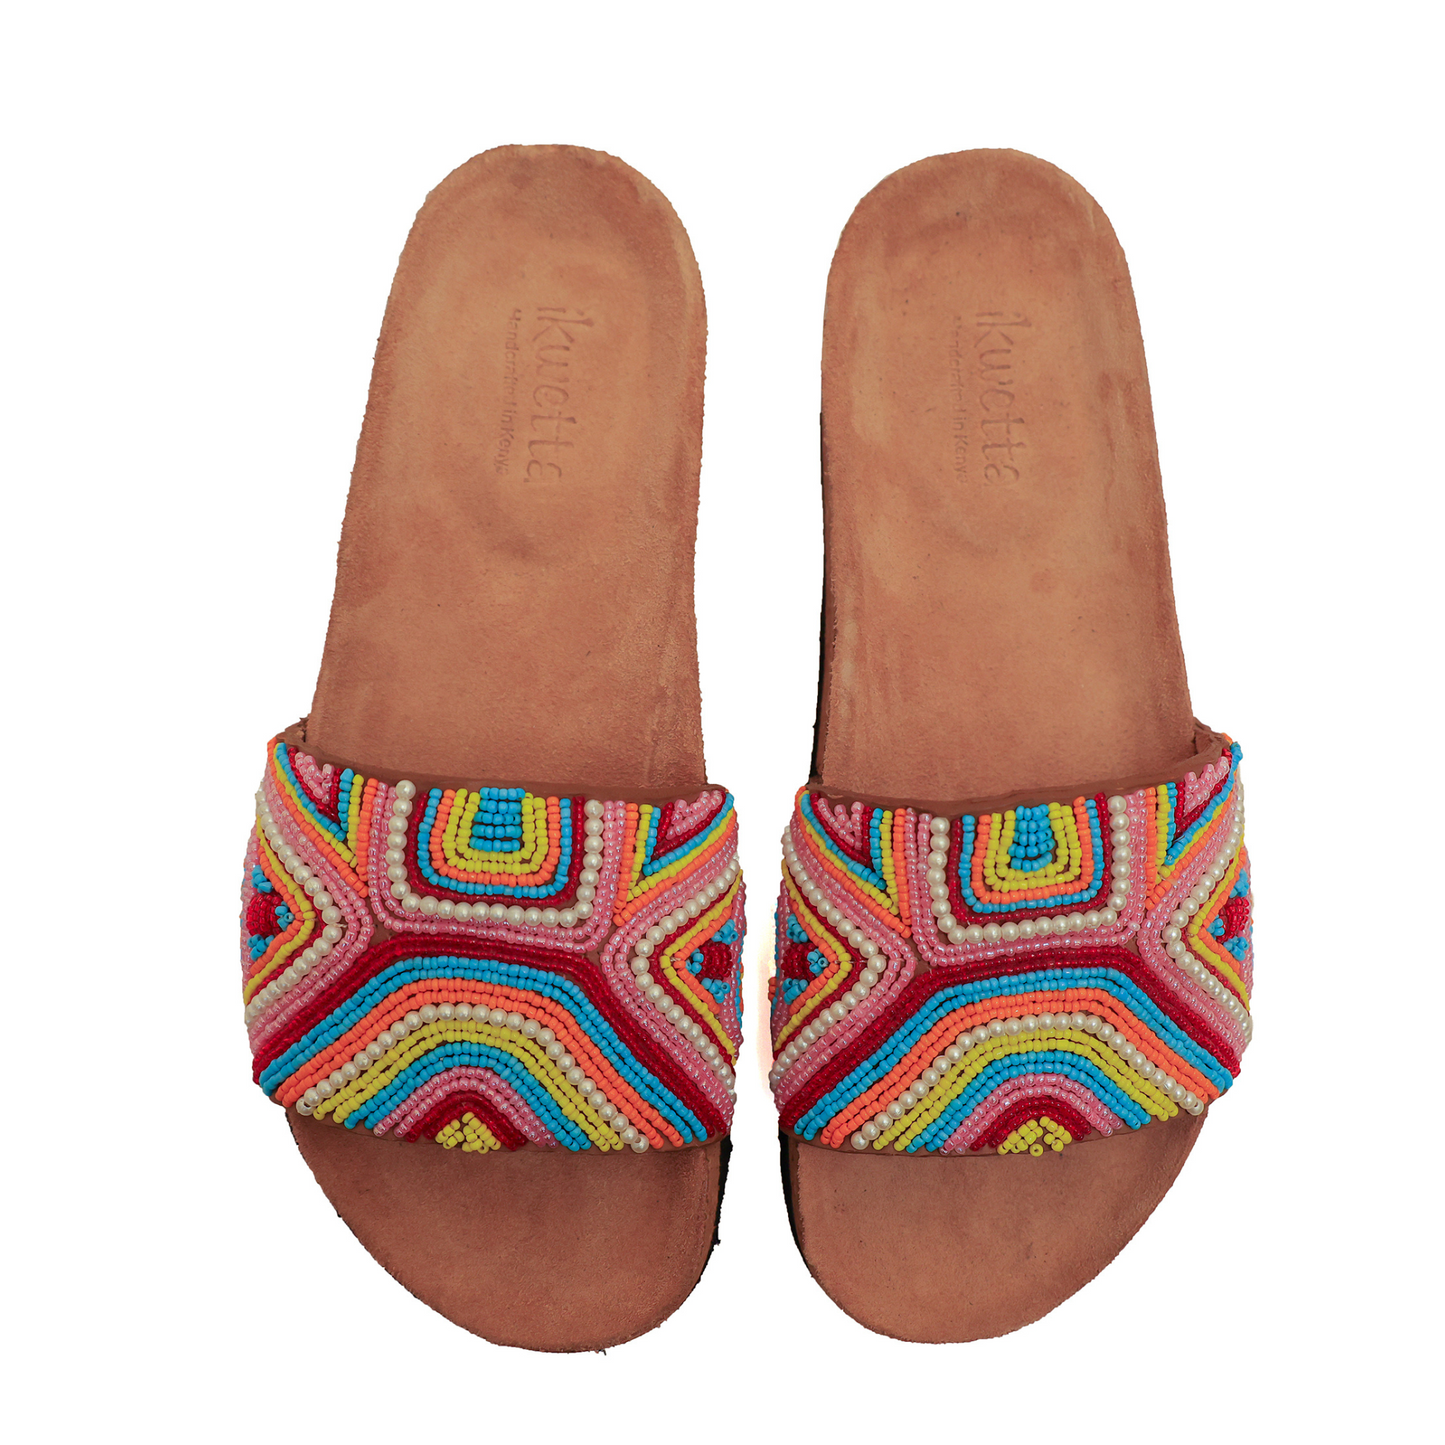 Inca slides with cork footbed and Maasai beaded upper